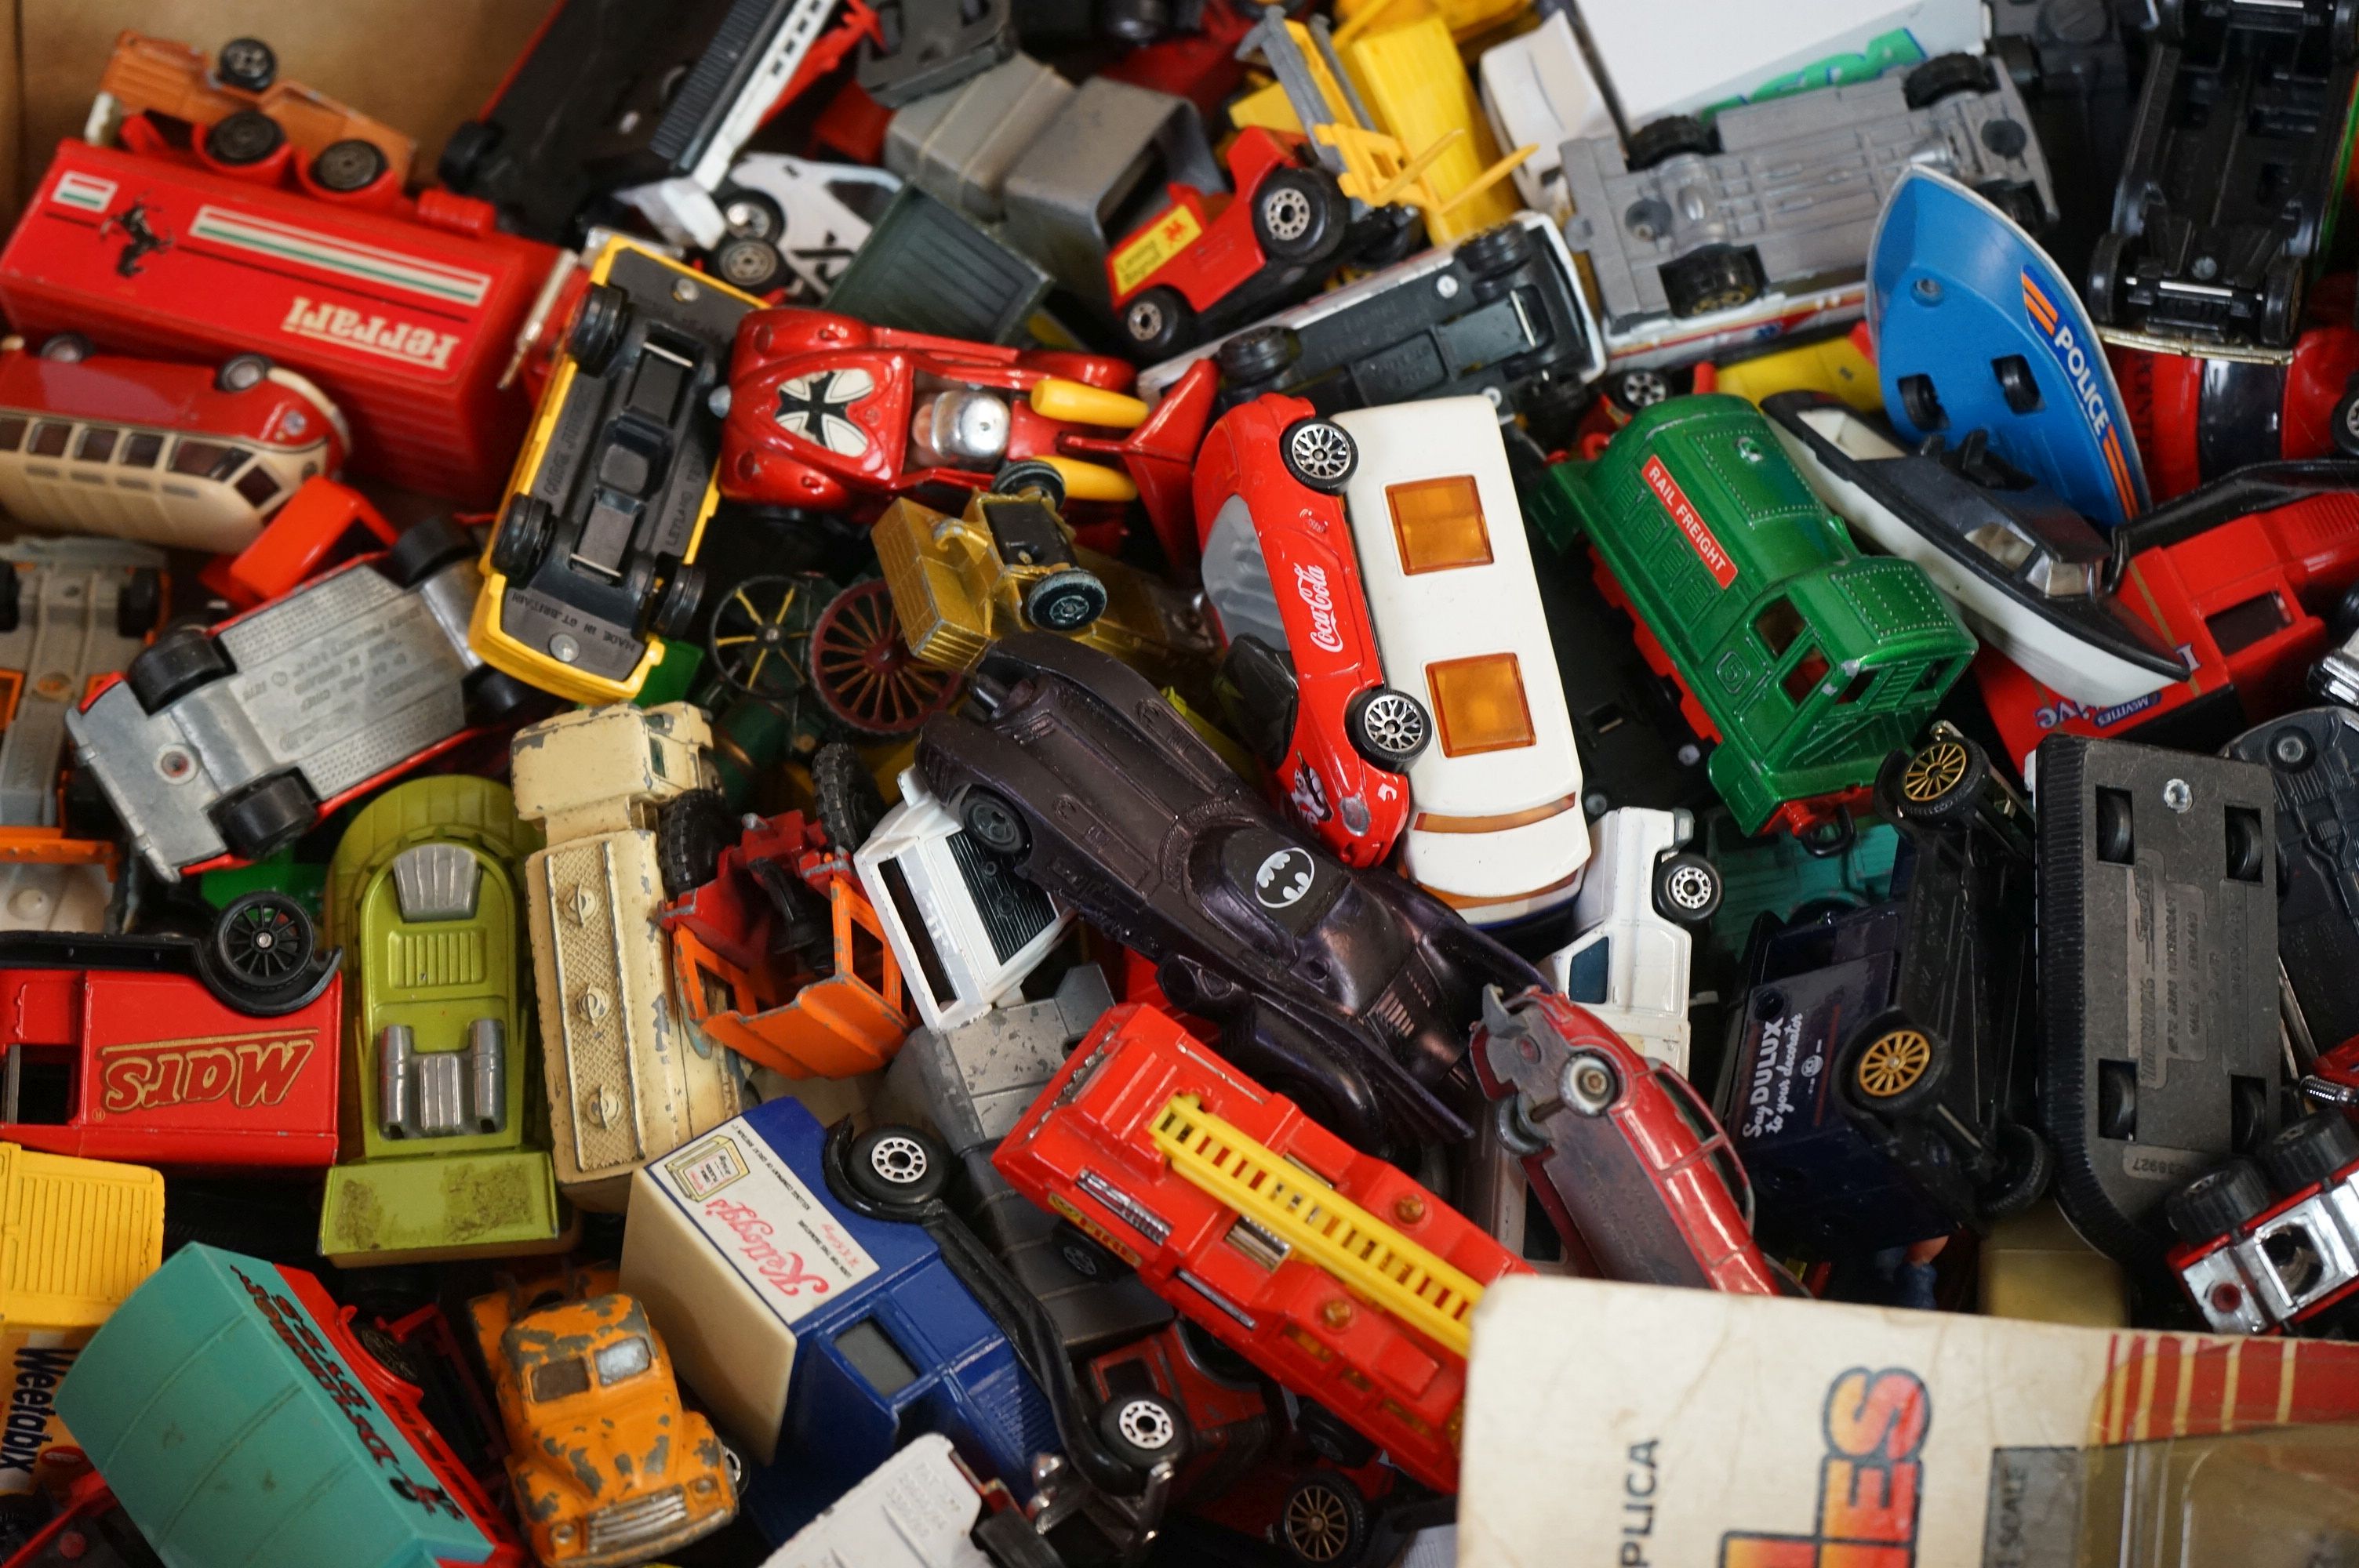 Play worn diecast vehicles to include Matchbox, Corgi, Ertl, Husky, Dinky, approx 100. Also included - Image 4 of 7